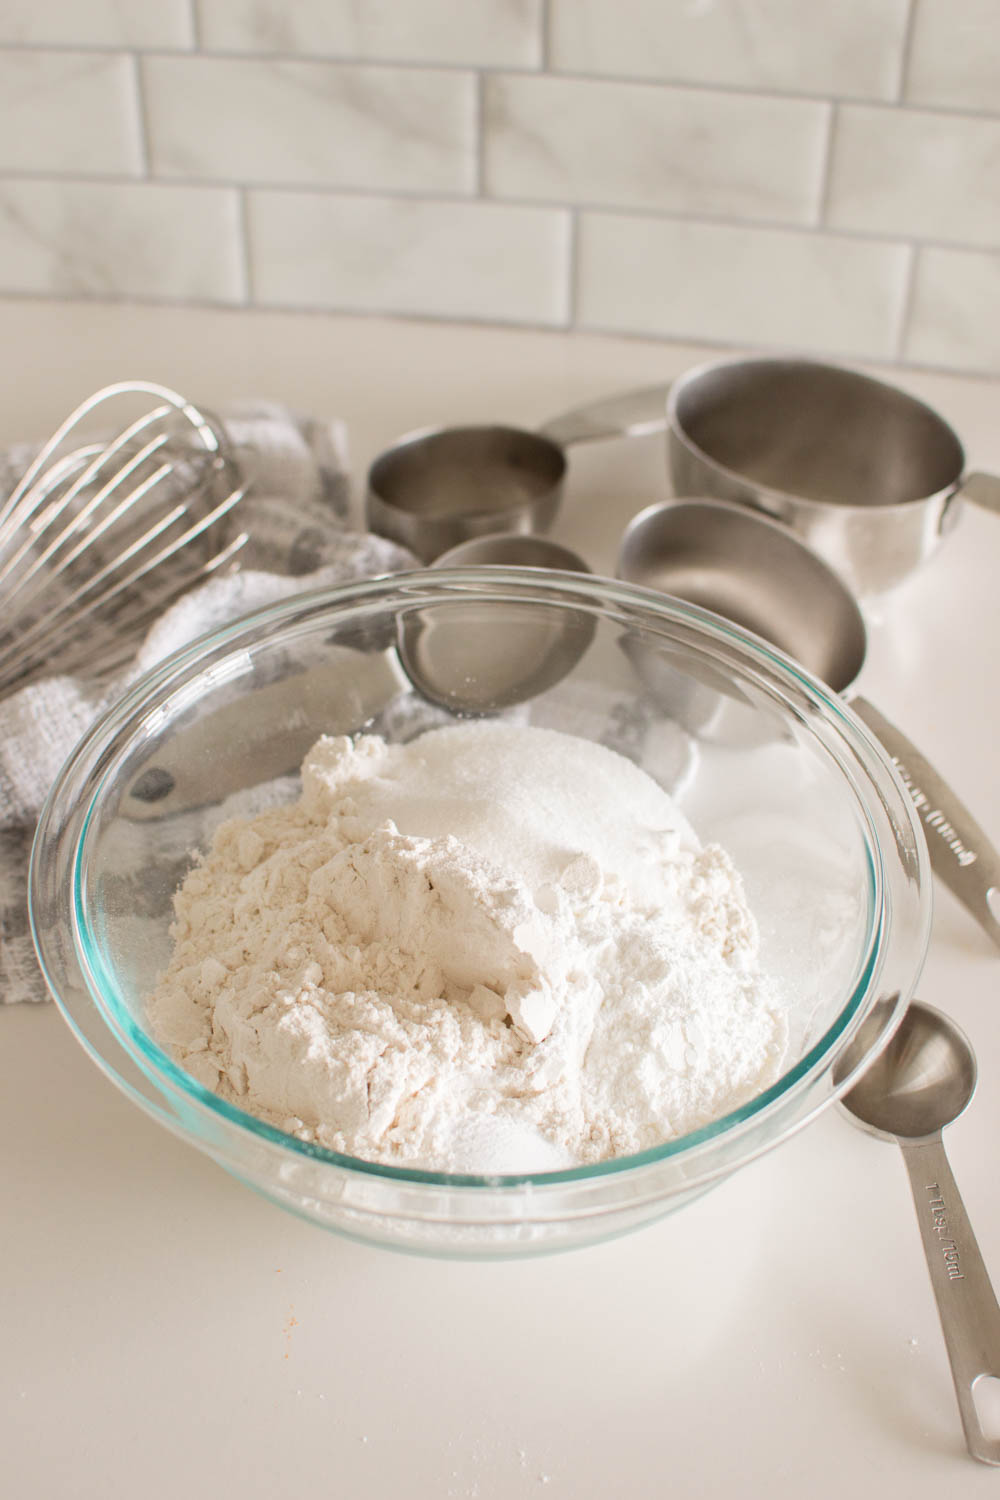 Dry ingredients for pancake batter in a glass bowl surrounded by measuring cups and a whisk